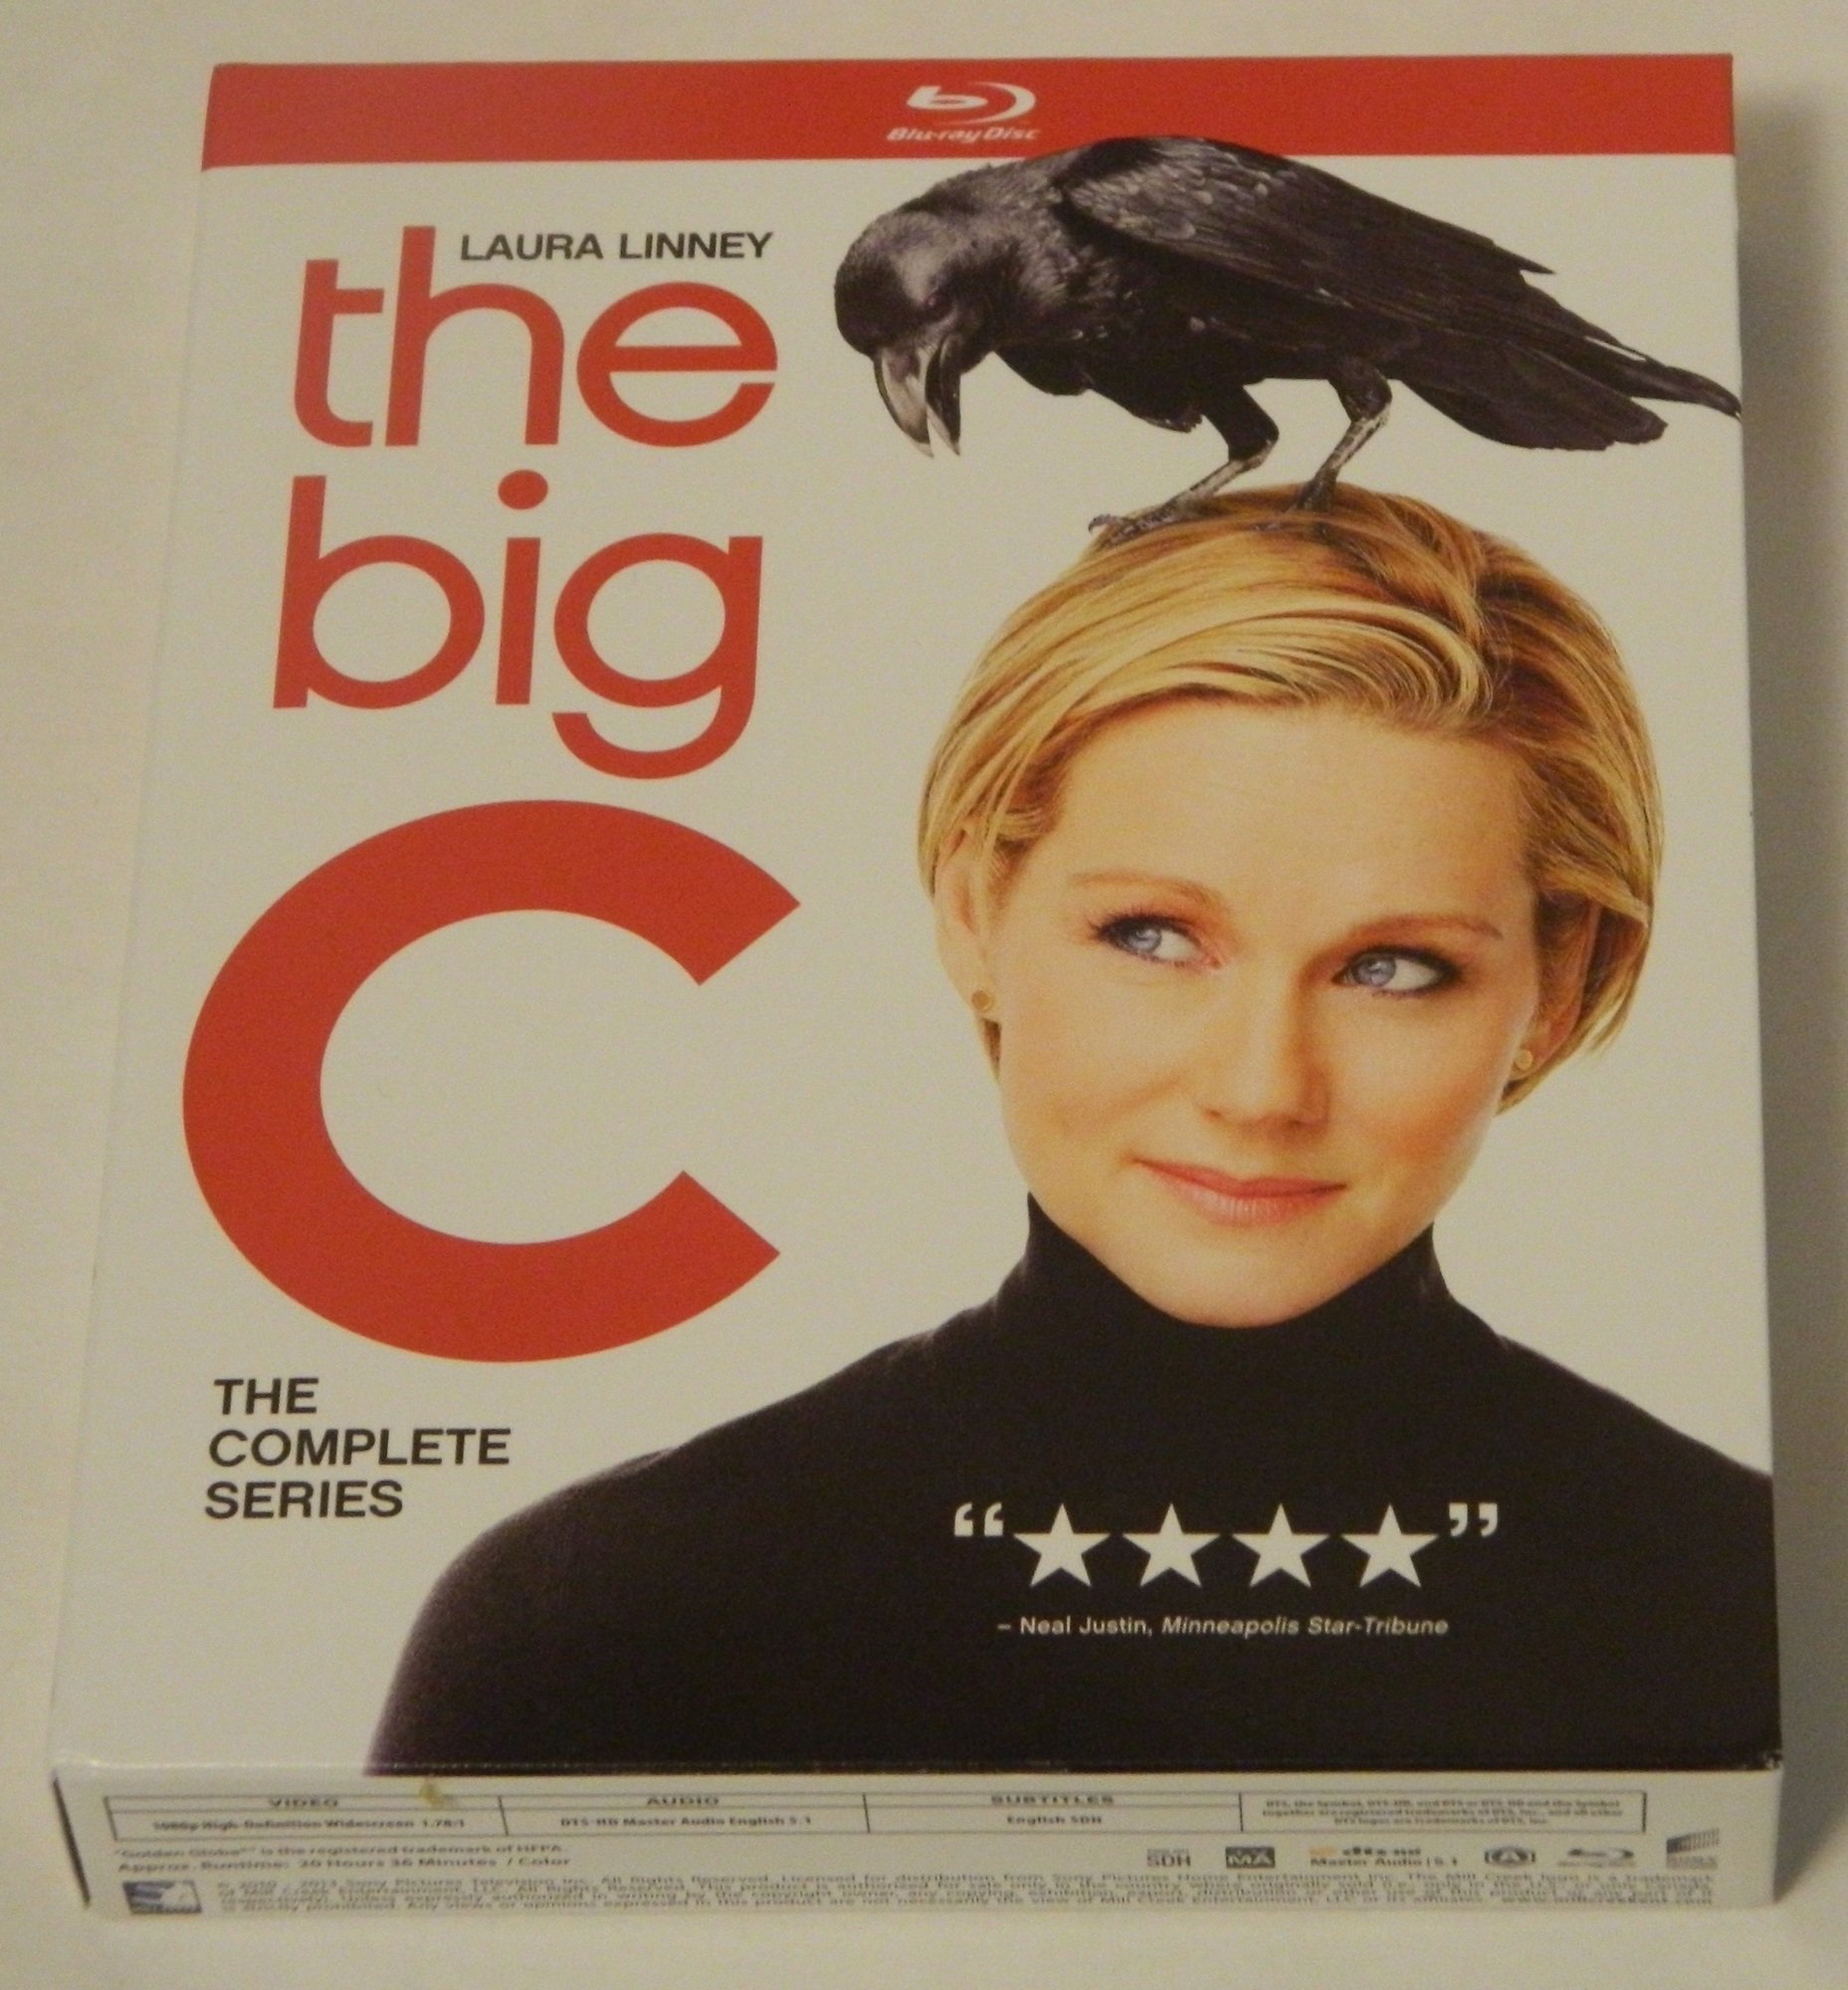 The Big C The Complete Series Blu-ray